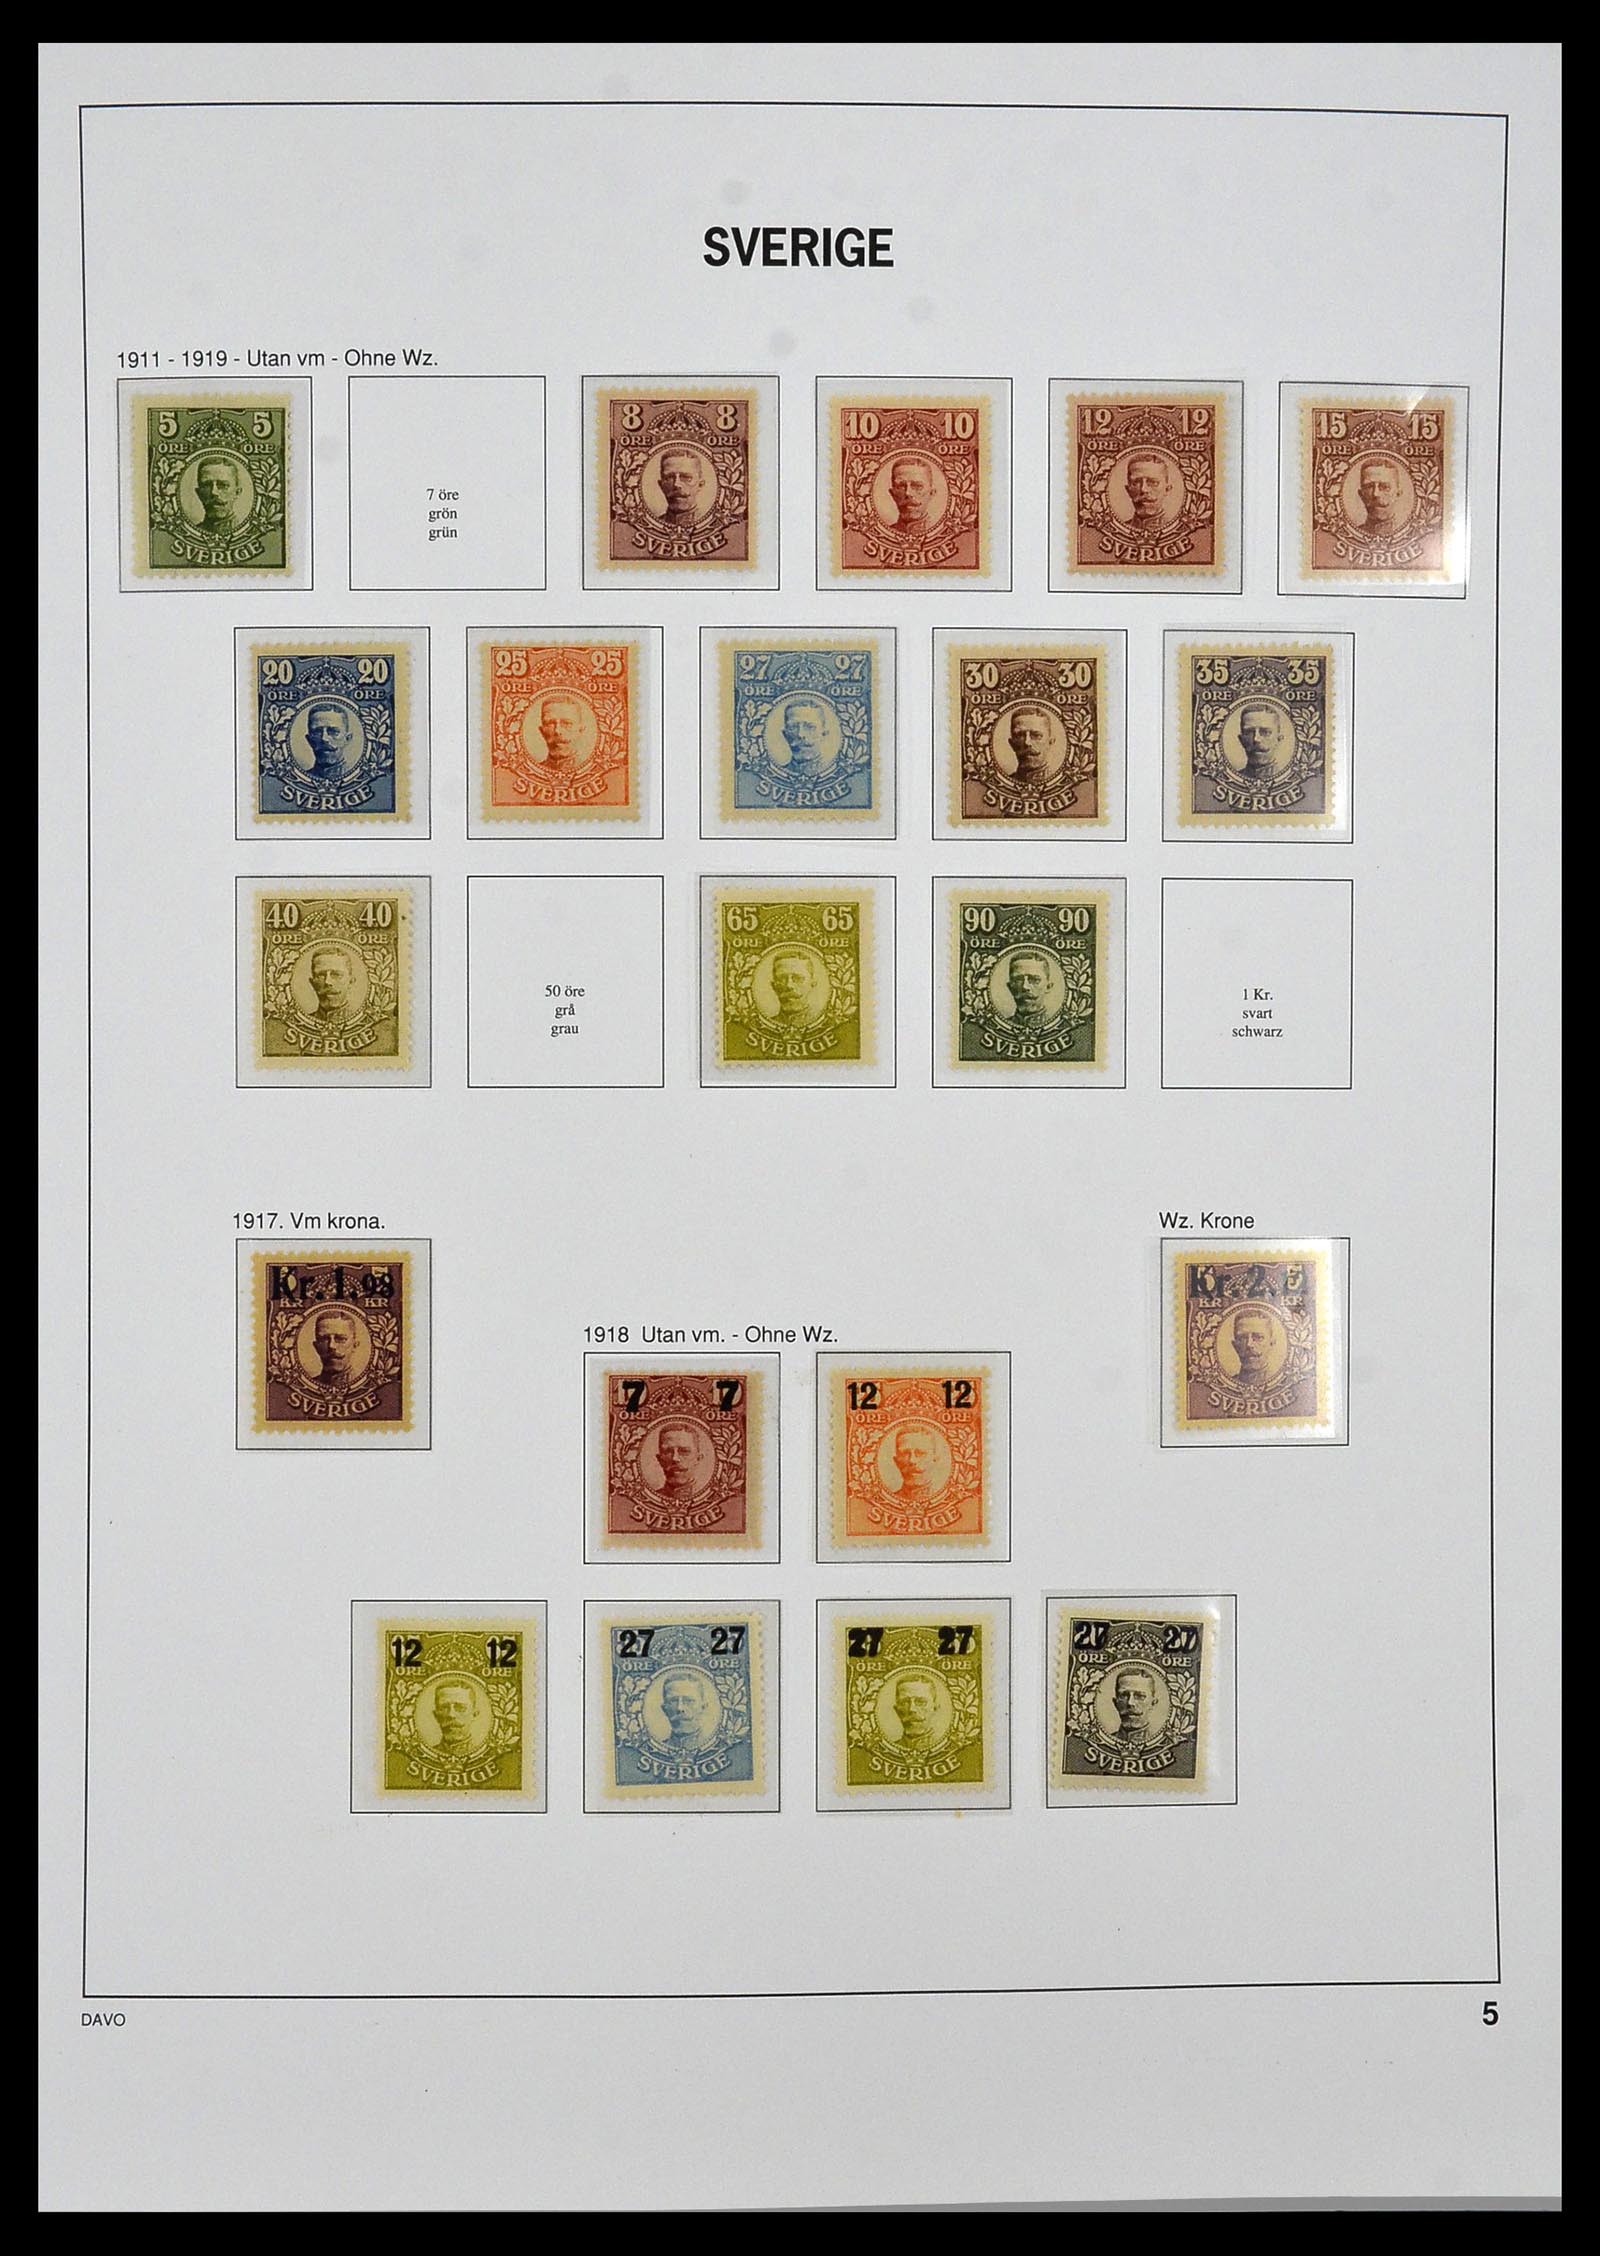 34292 003 - Stamp collection 34292 Sweden 1891-2015!